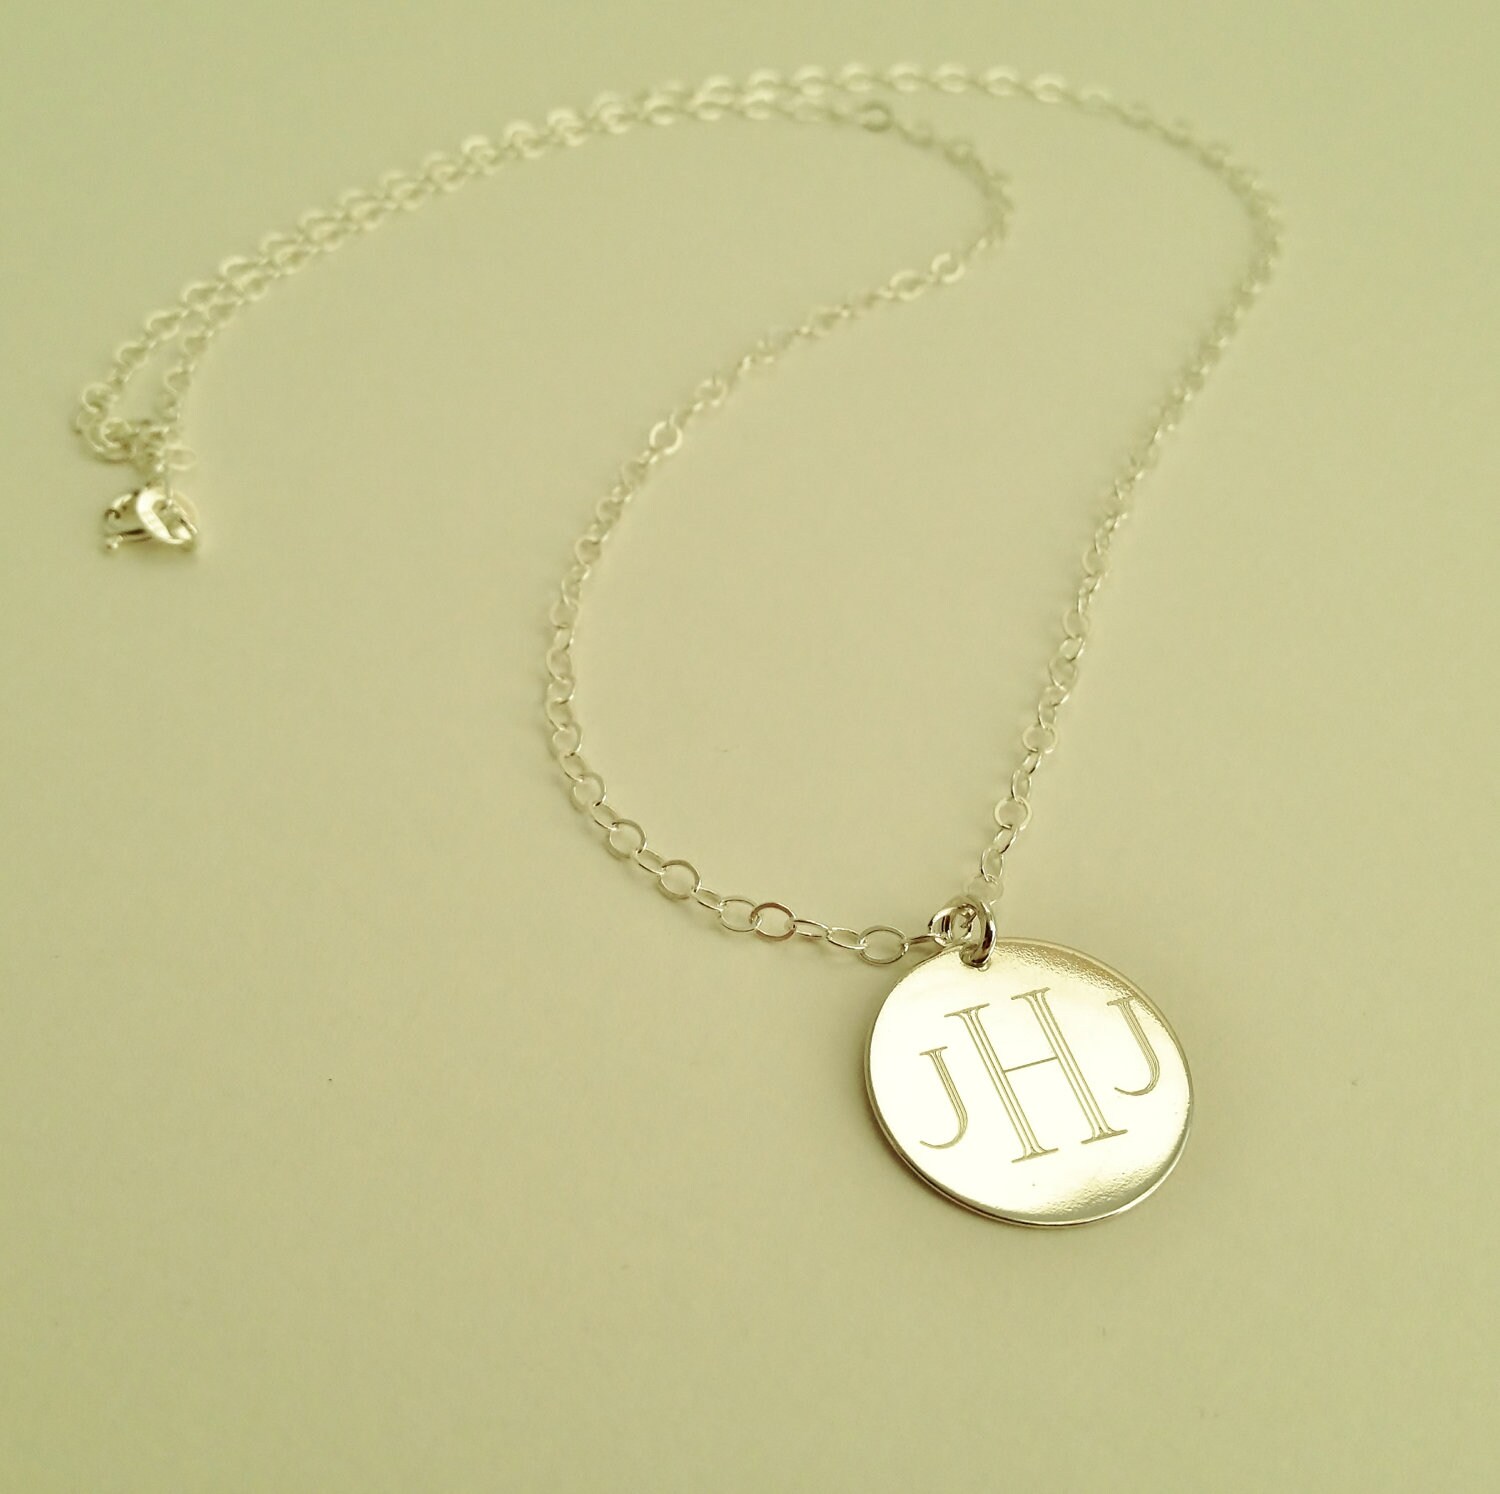 Monogram Necklace in Sterling Silver for Women or Bridesmaid Present